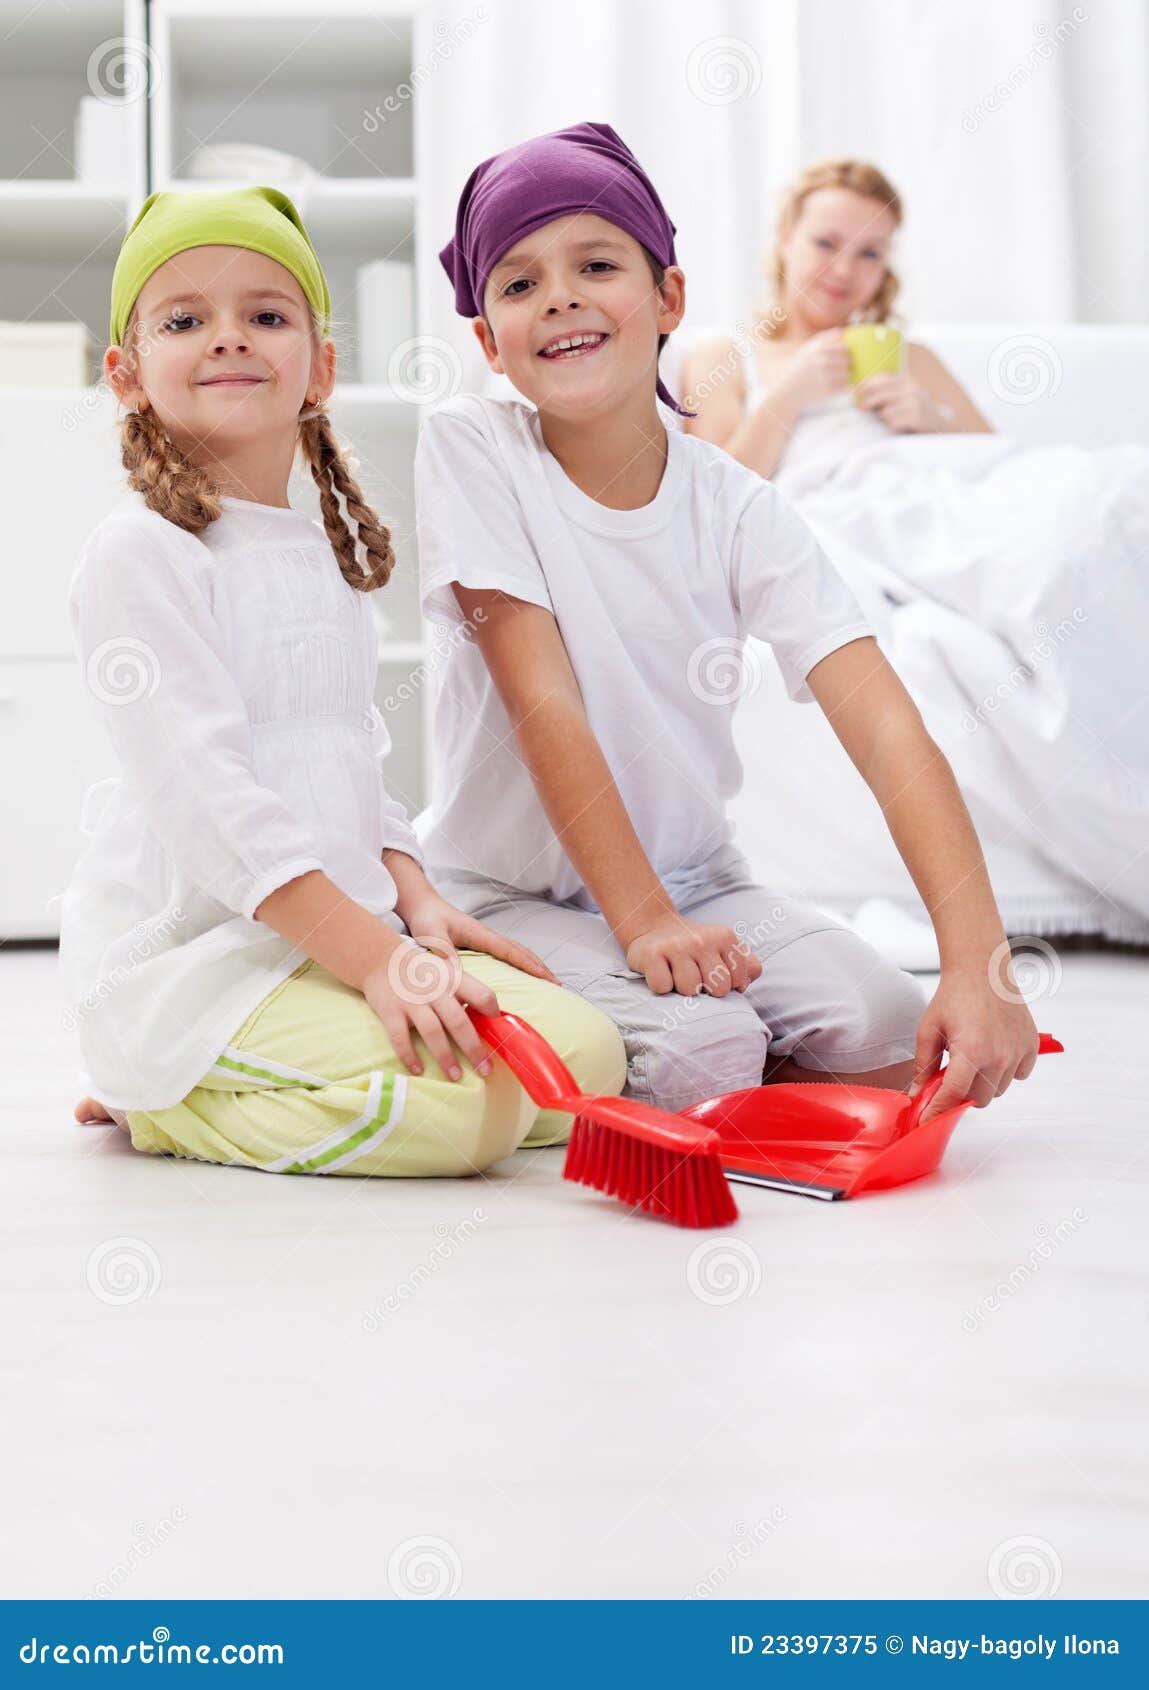 Kids Cleaning The Room Helping Their Mother Royalty Free Stock Photo